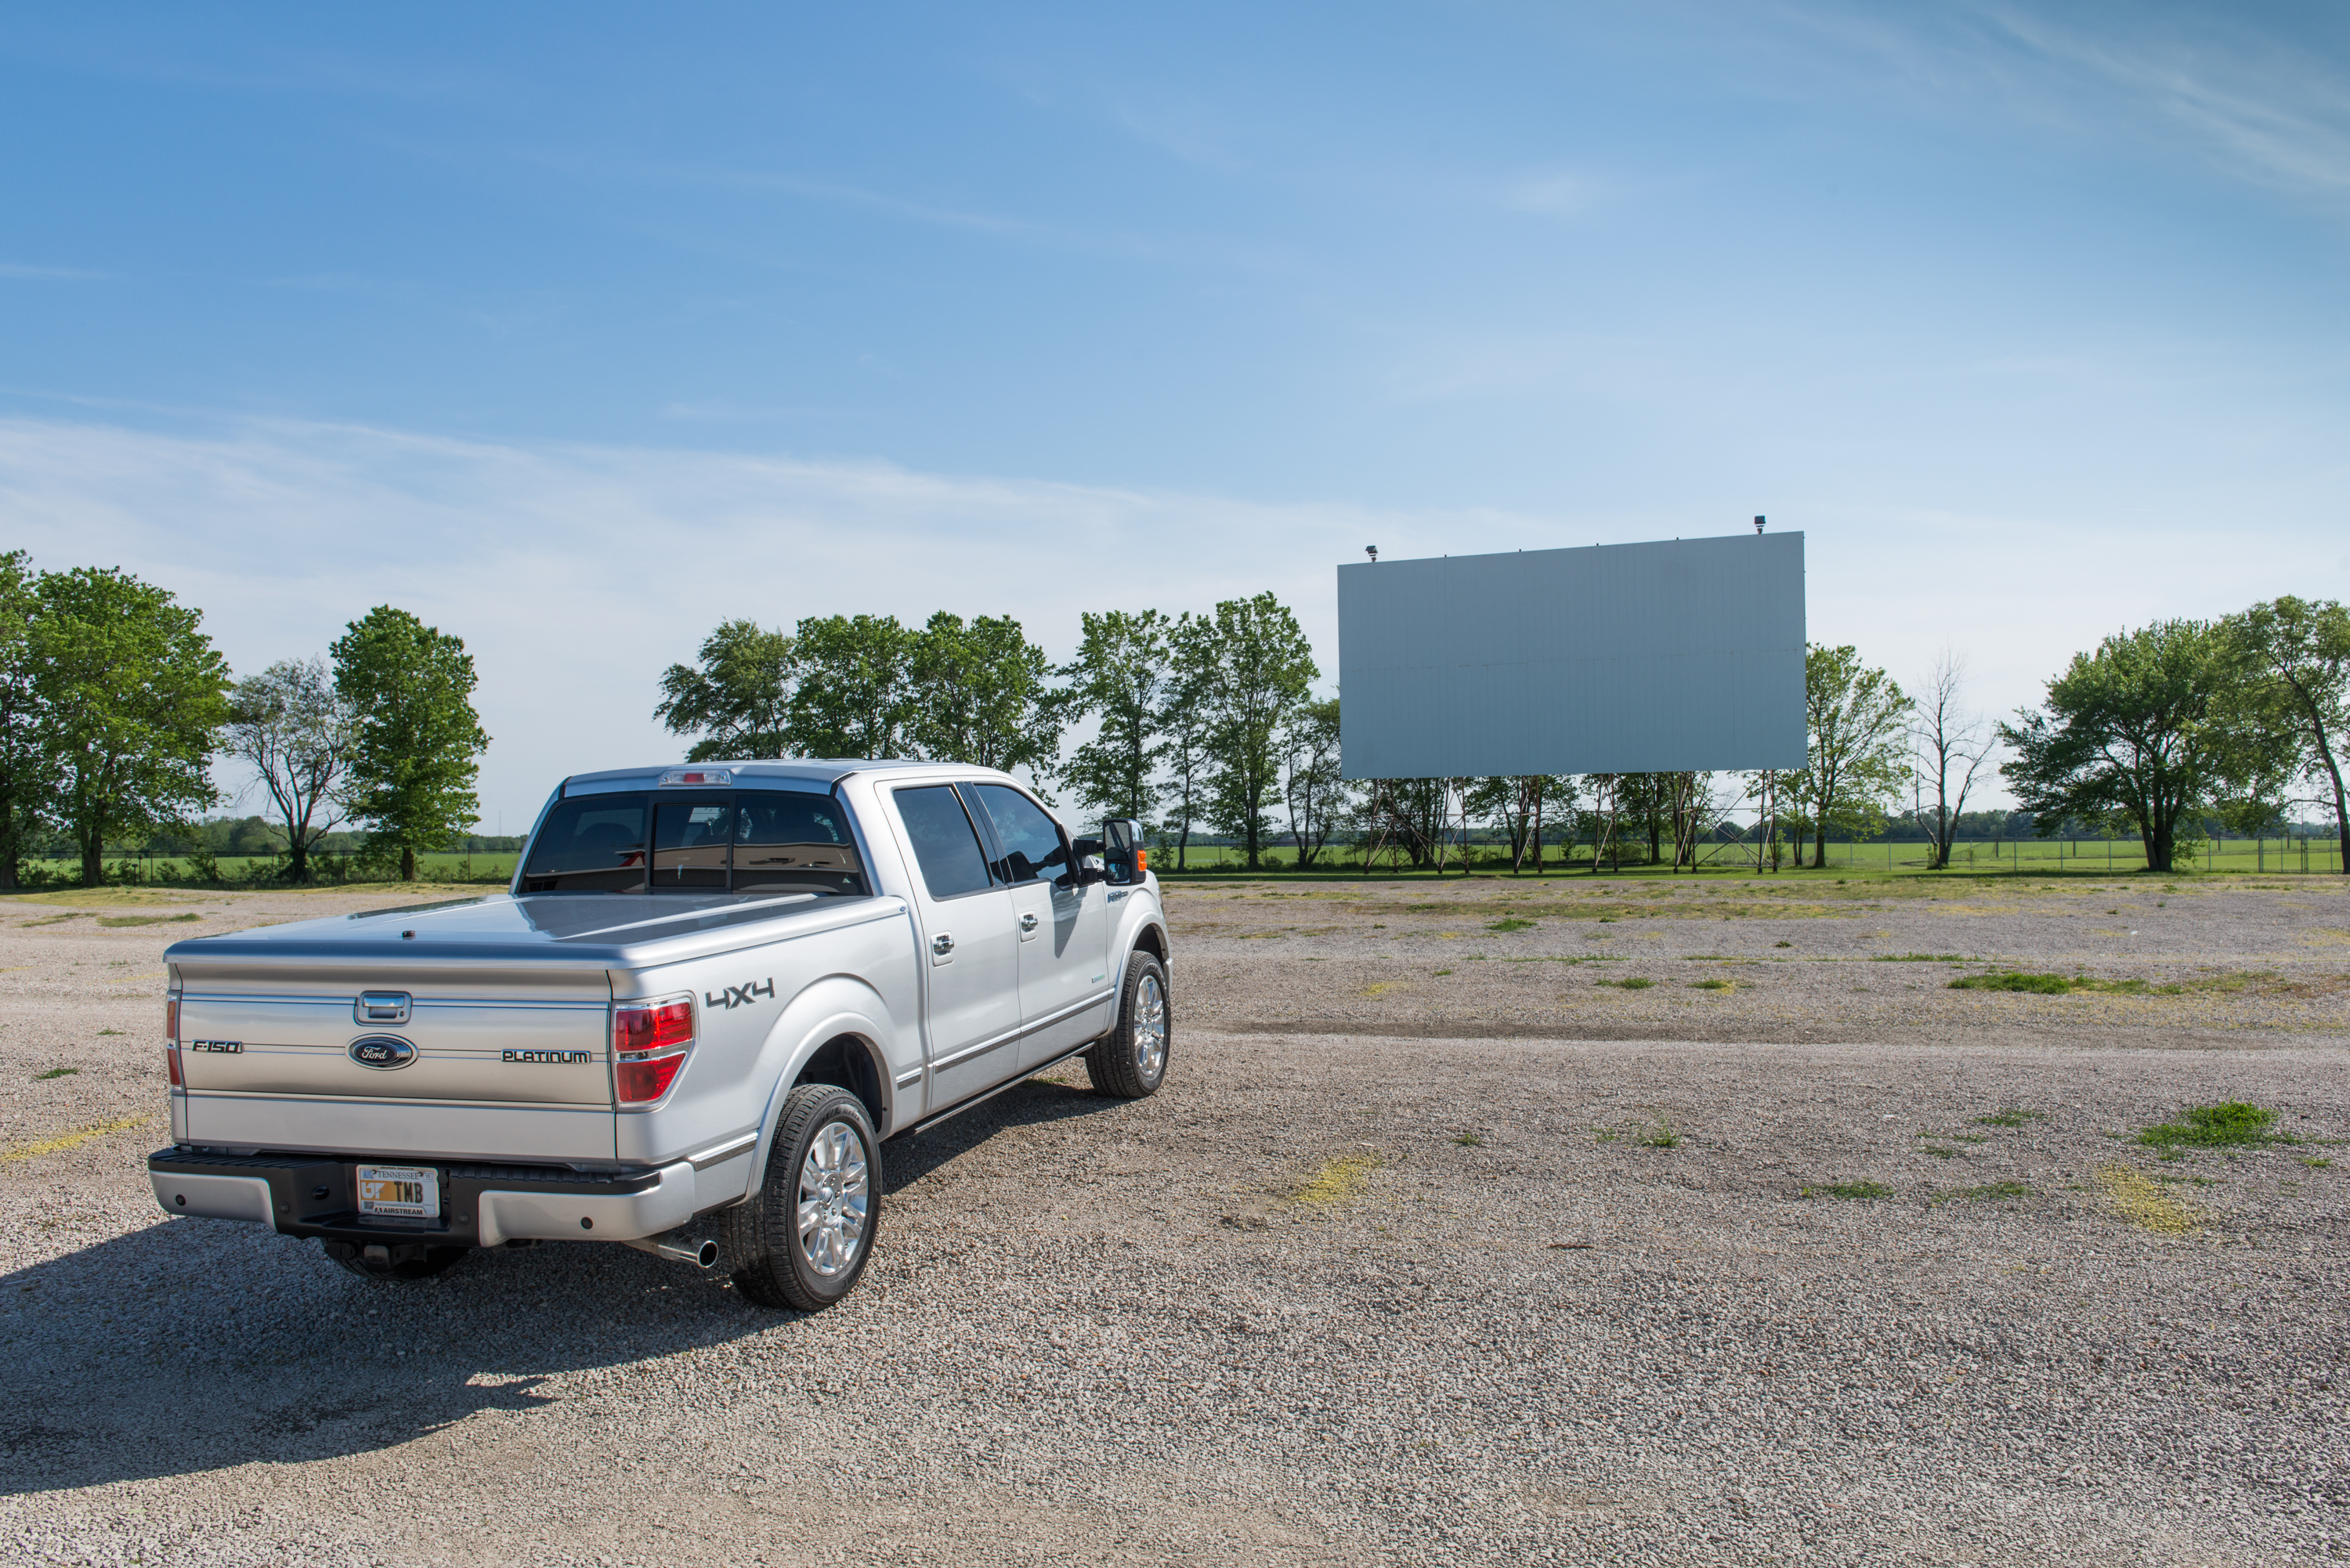 Movie time at Route 66 Twin Drive-In Theatre in Springfield, Illinois